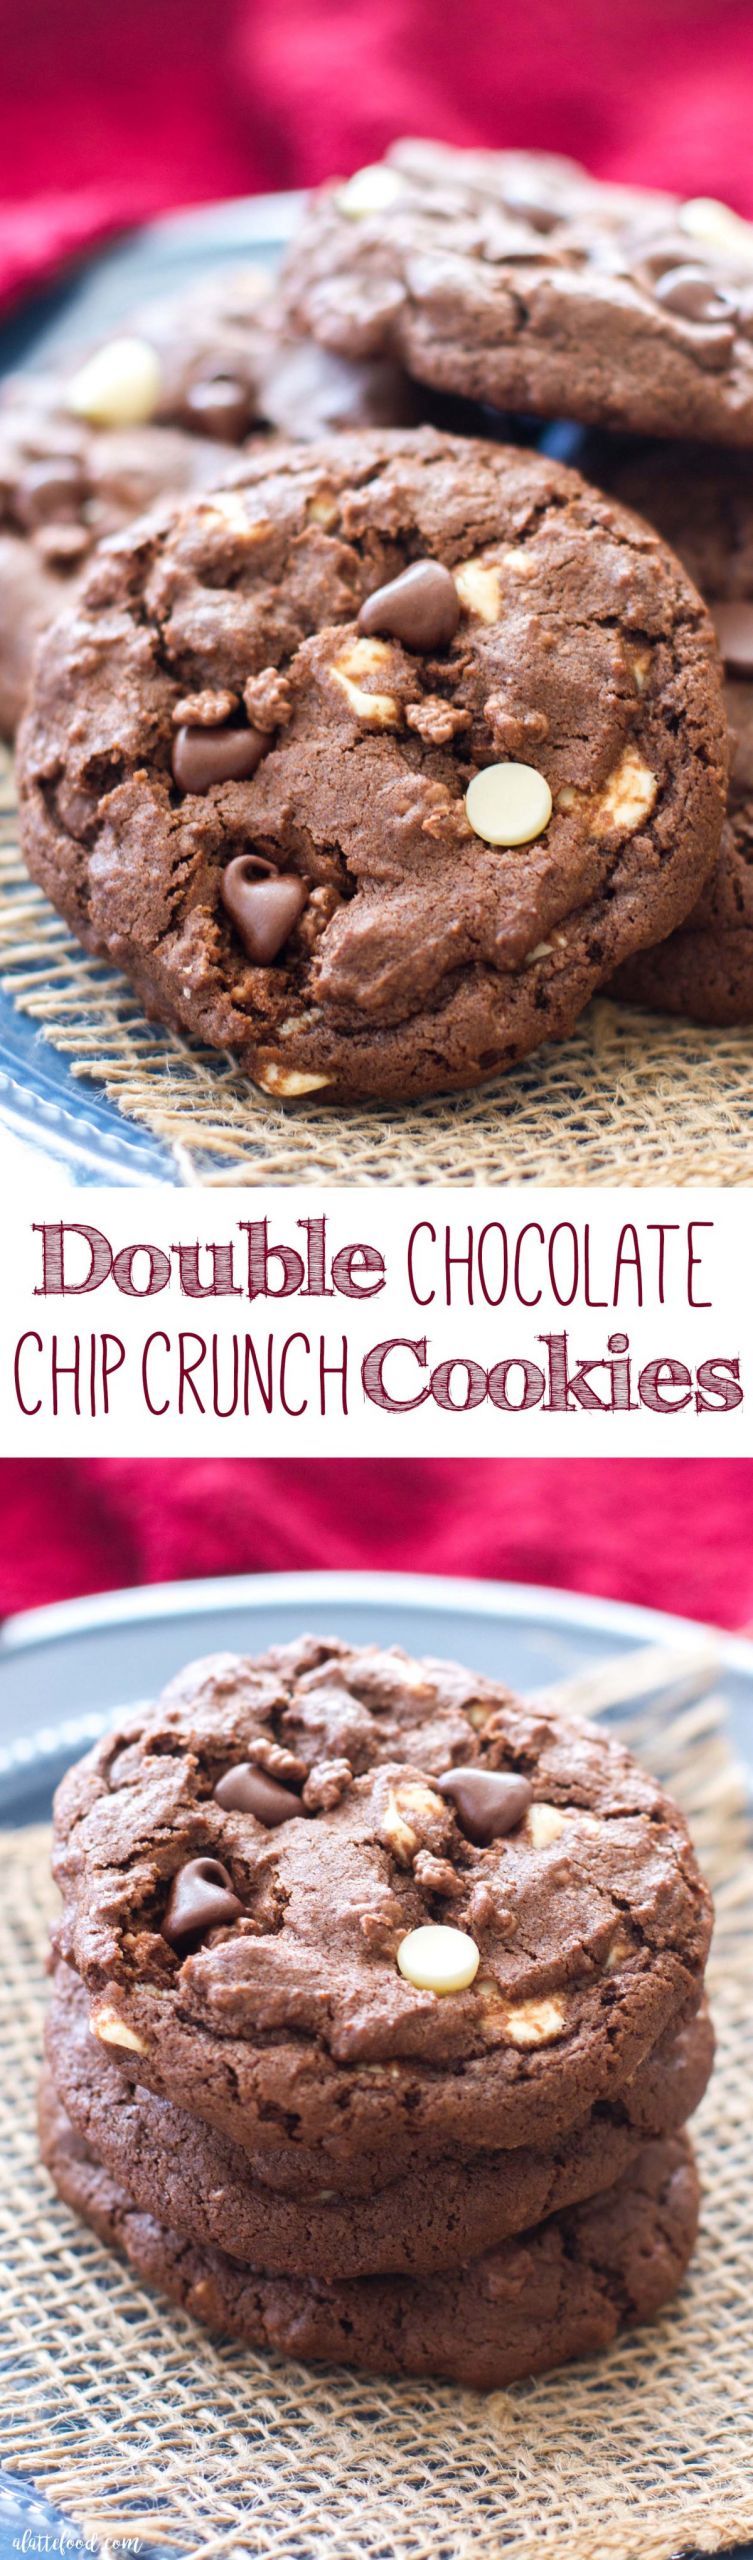 Nestle Double Chocolate Chip Cookies
 These rich double chocolate chip cookies are full of white